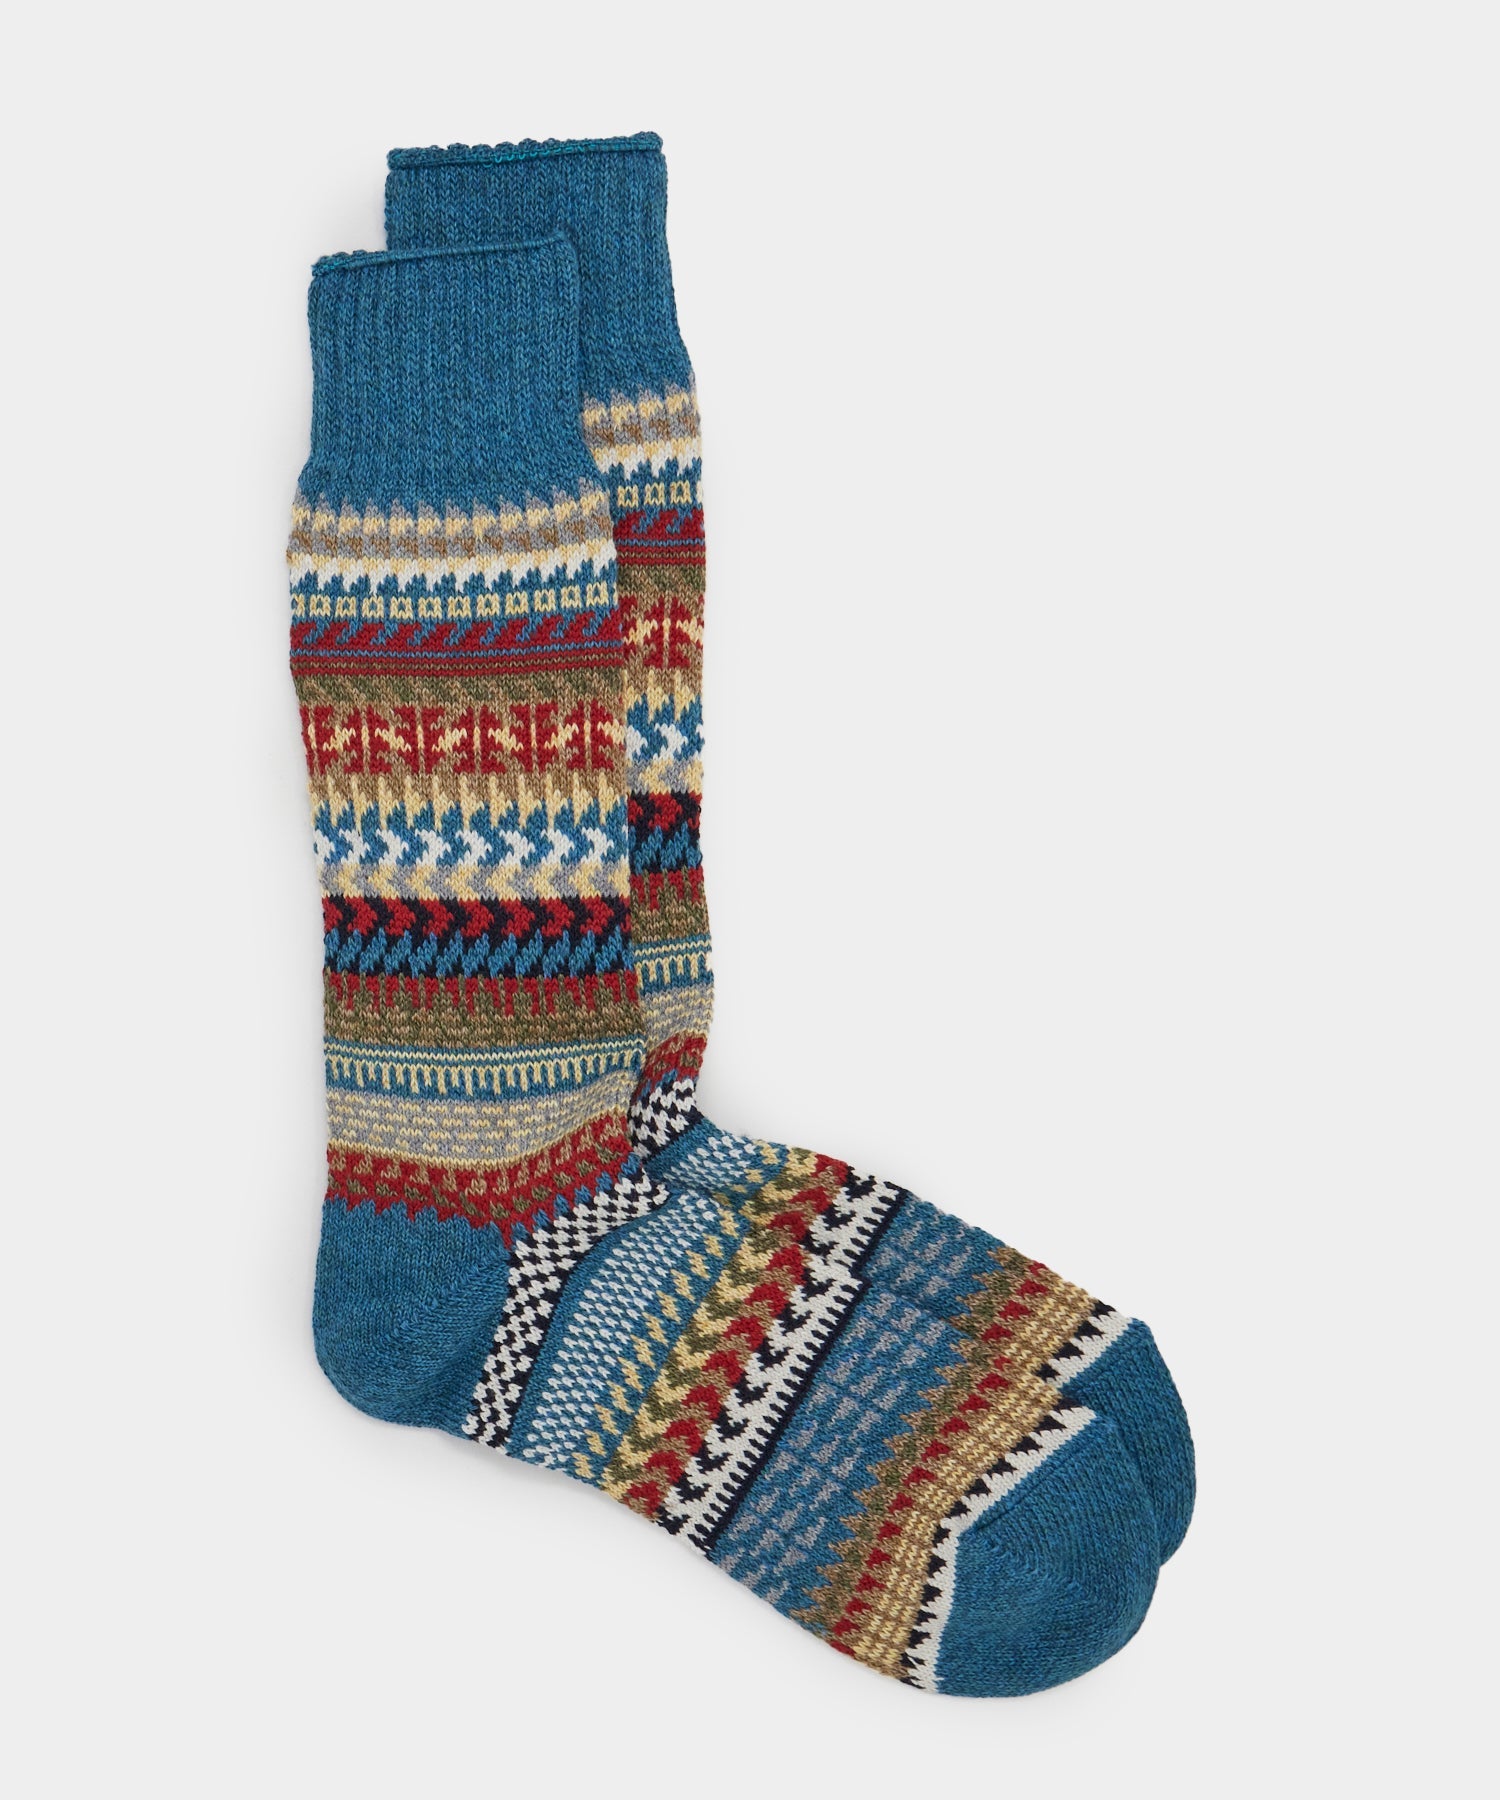 Chup Dry Valley Cotton Sock in Aegean